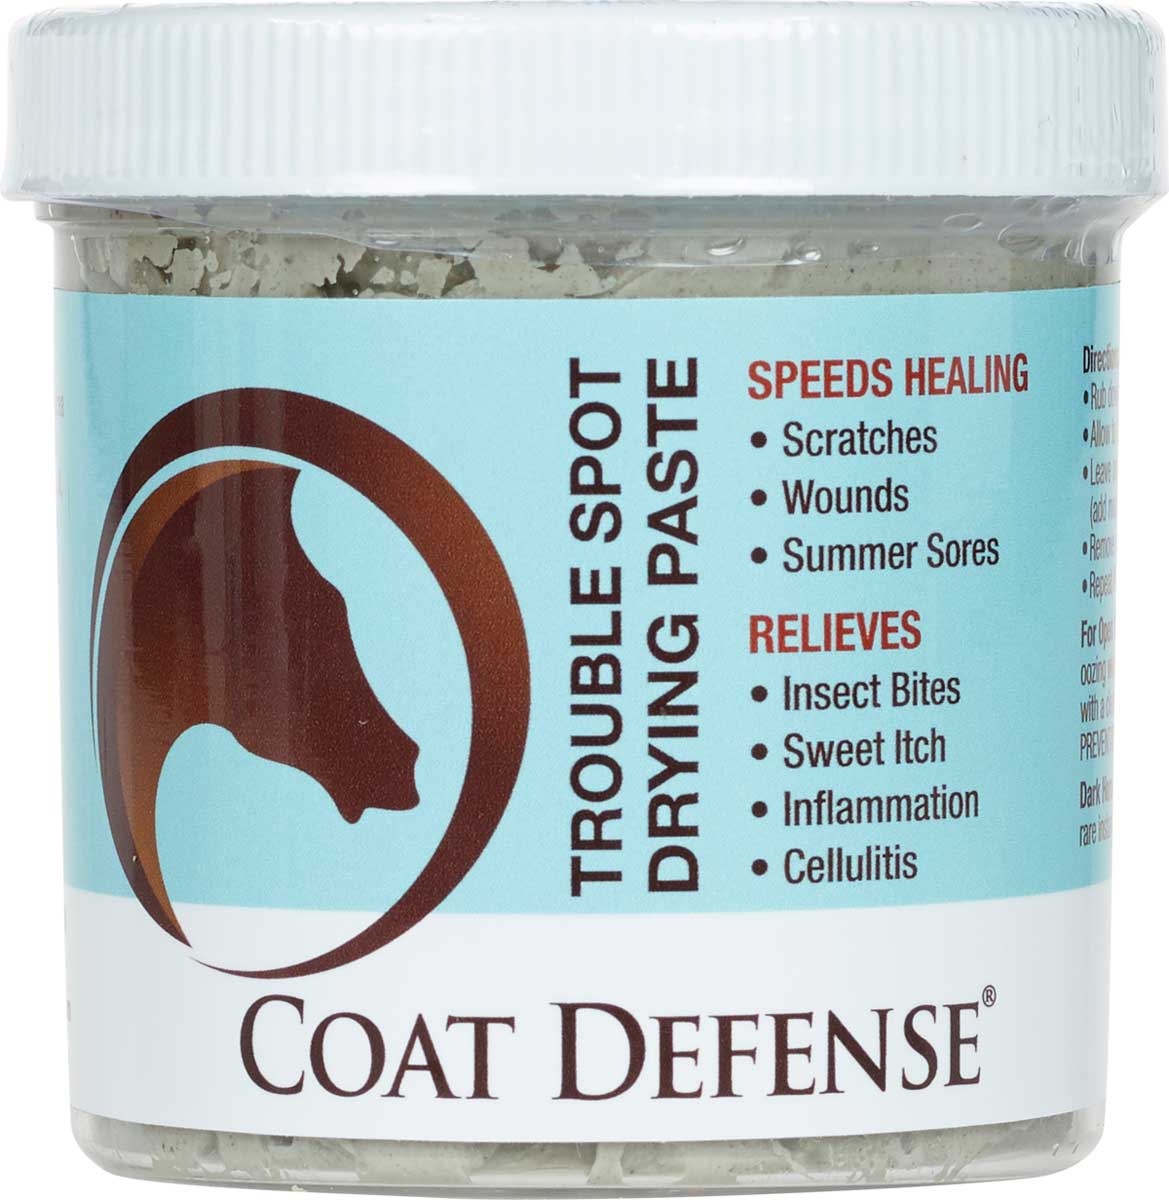 Coat Defense Trouble Spot Drying Paste for Horses Horsepowder - Wound Care, Health